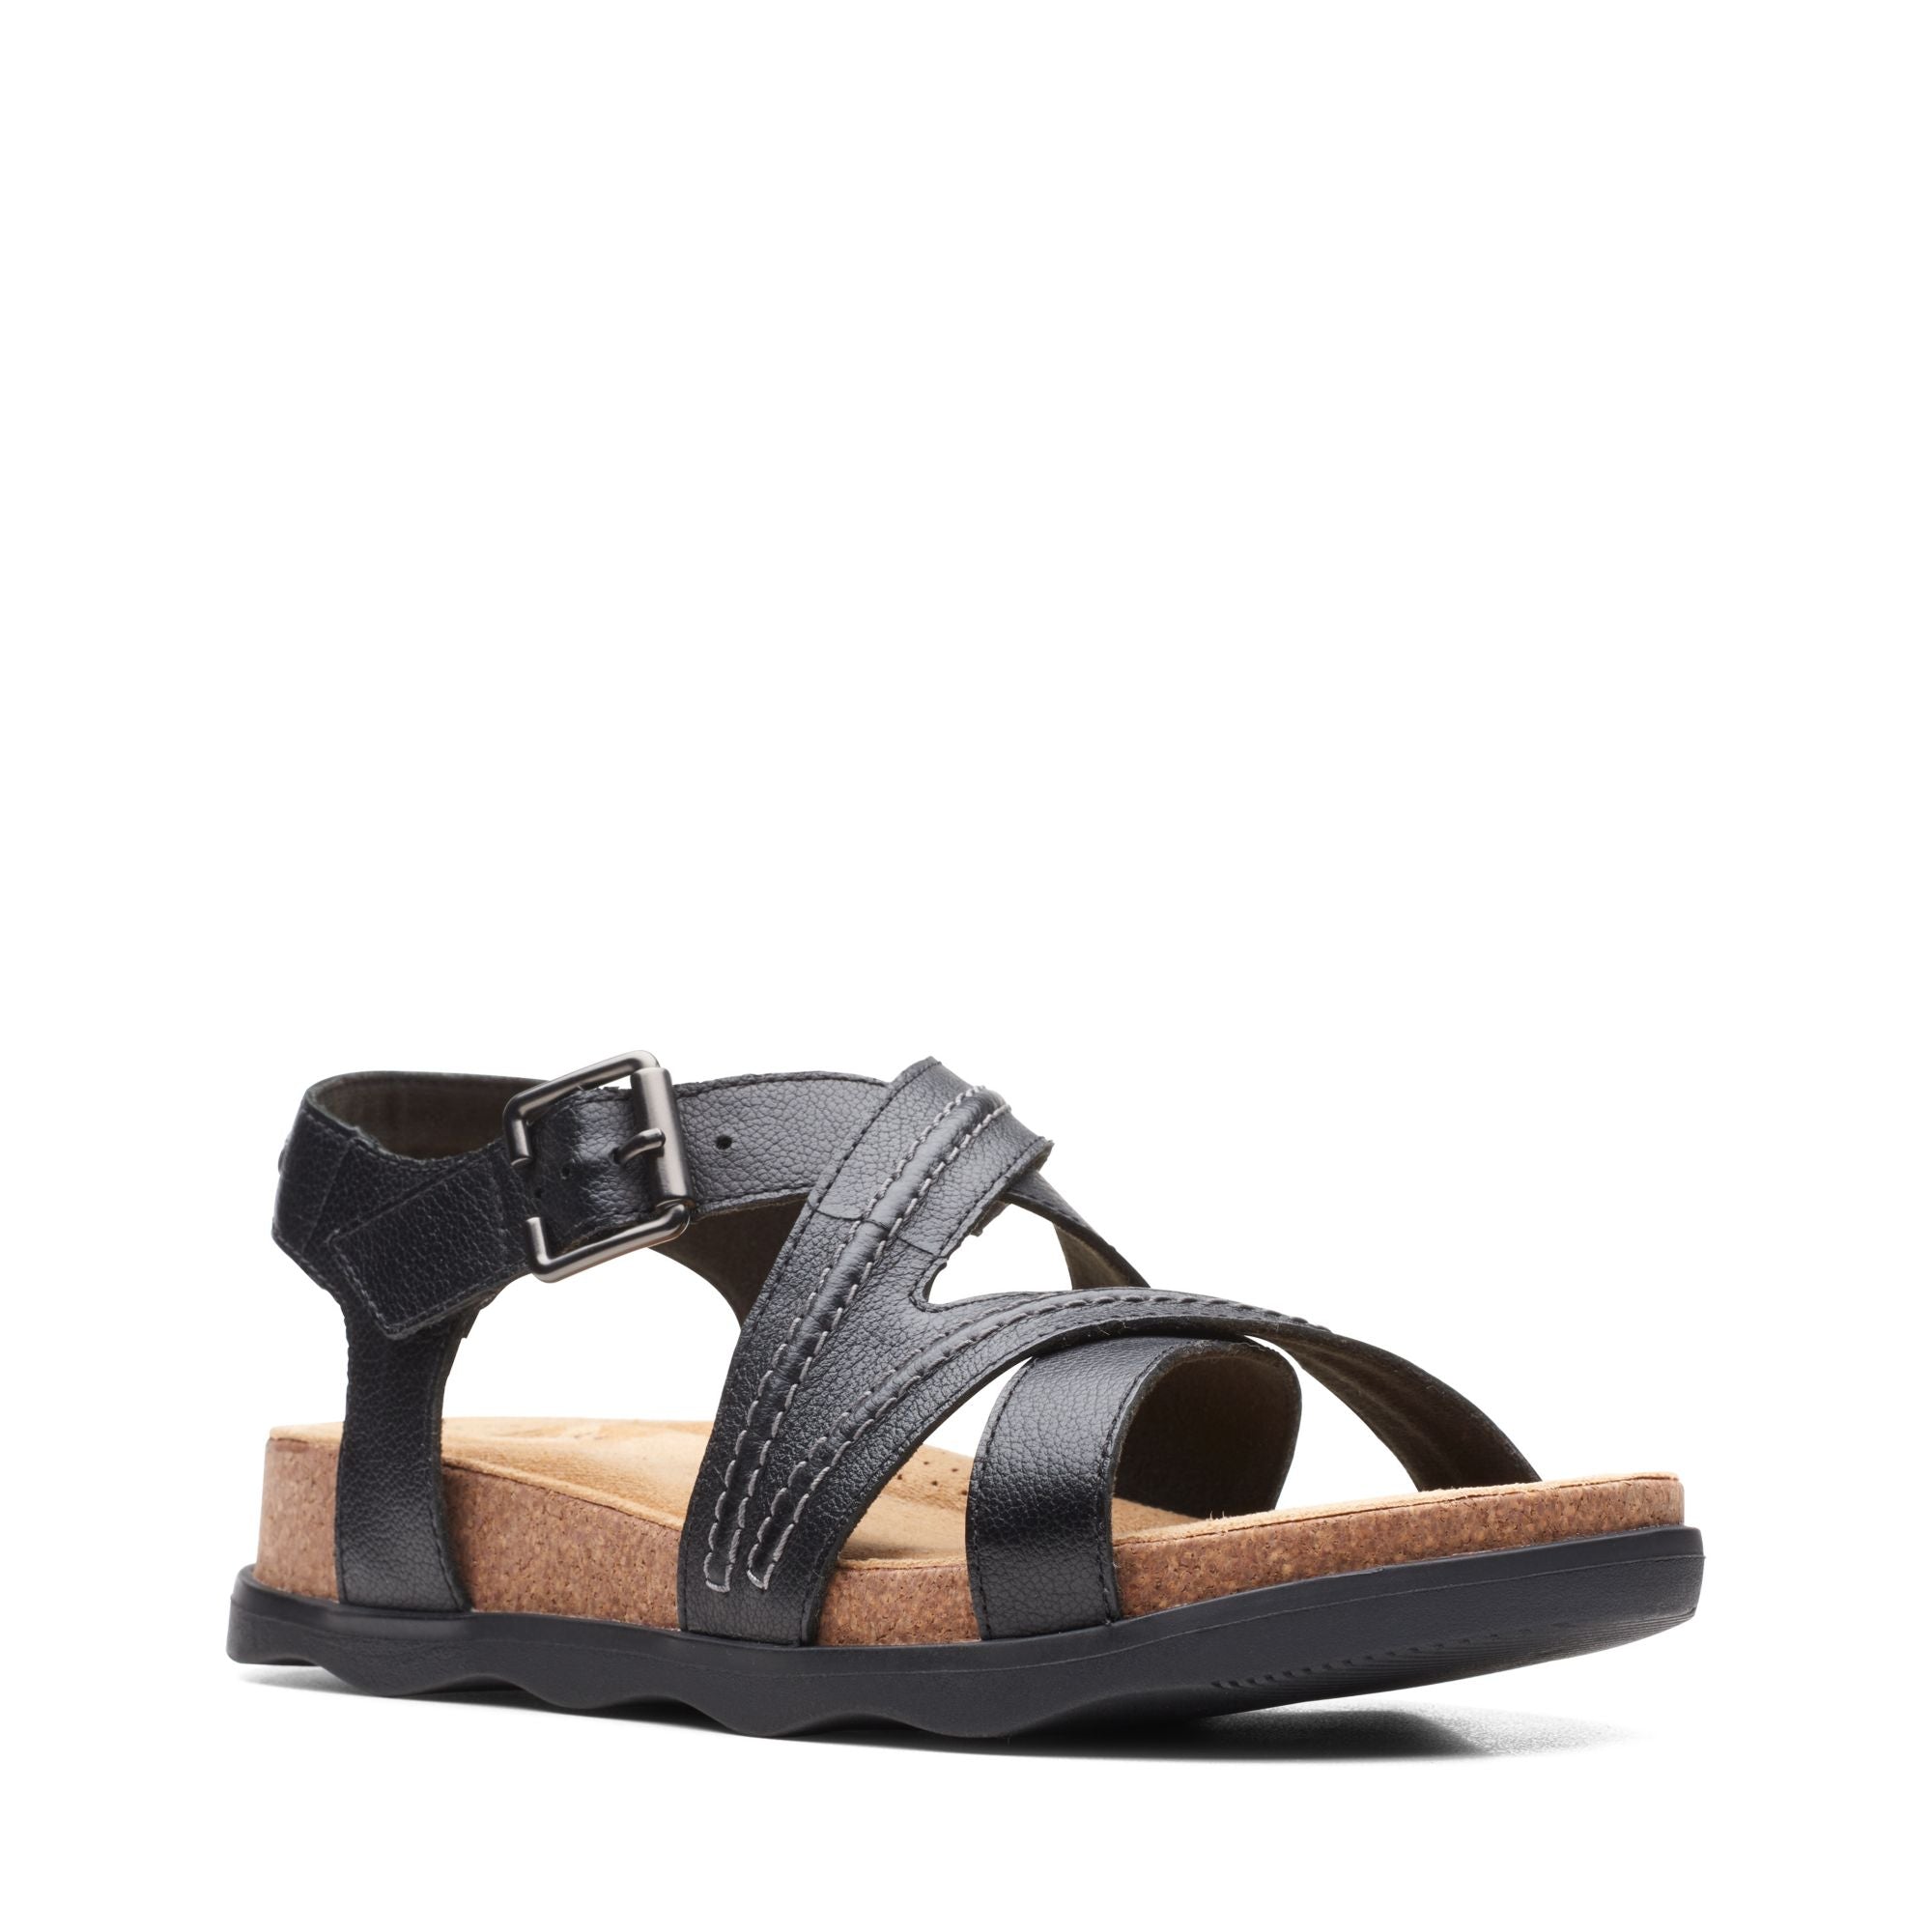 Women's Clarks Brynn Ave Color: Black Leather